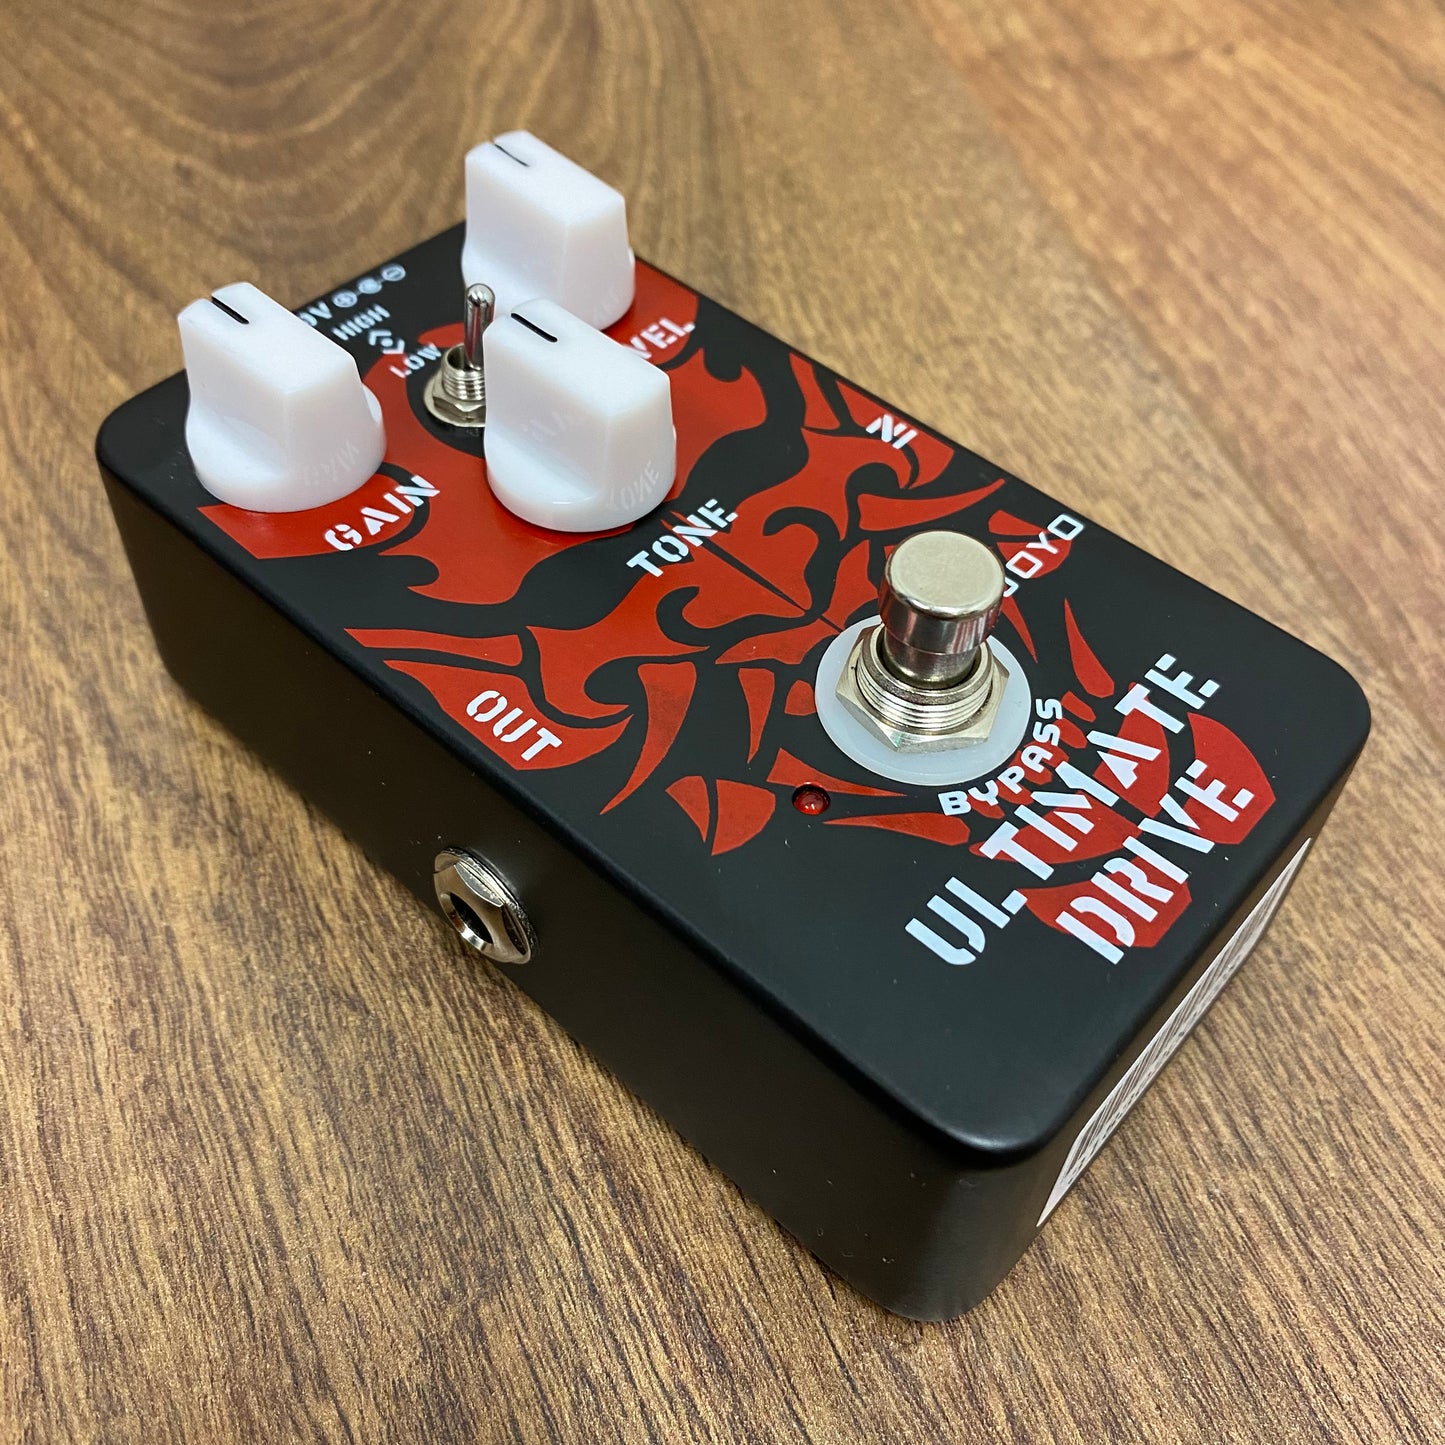 Pre-Owned Joyo JF-02 Ultimate Drive Pedal